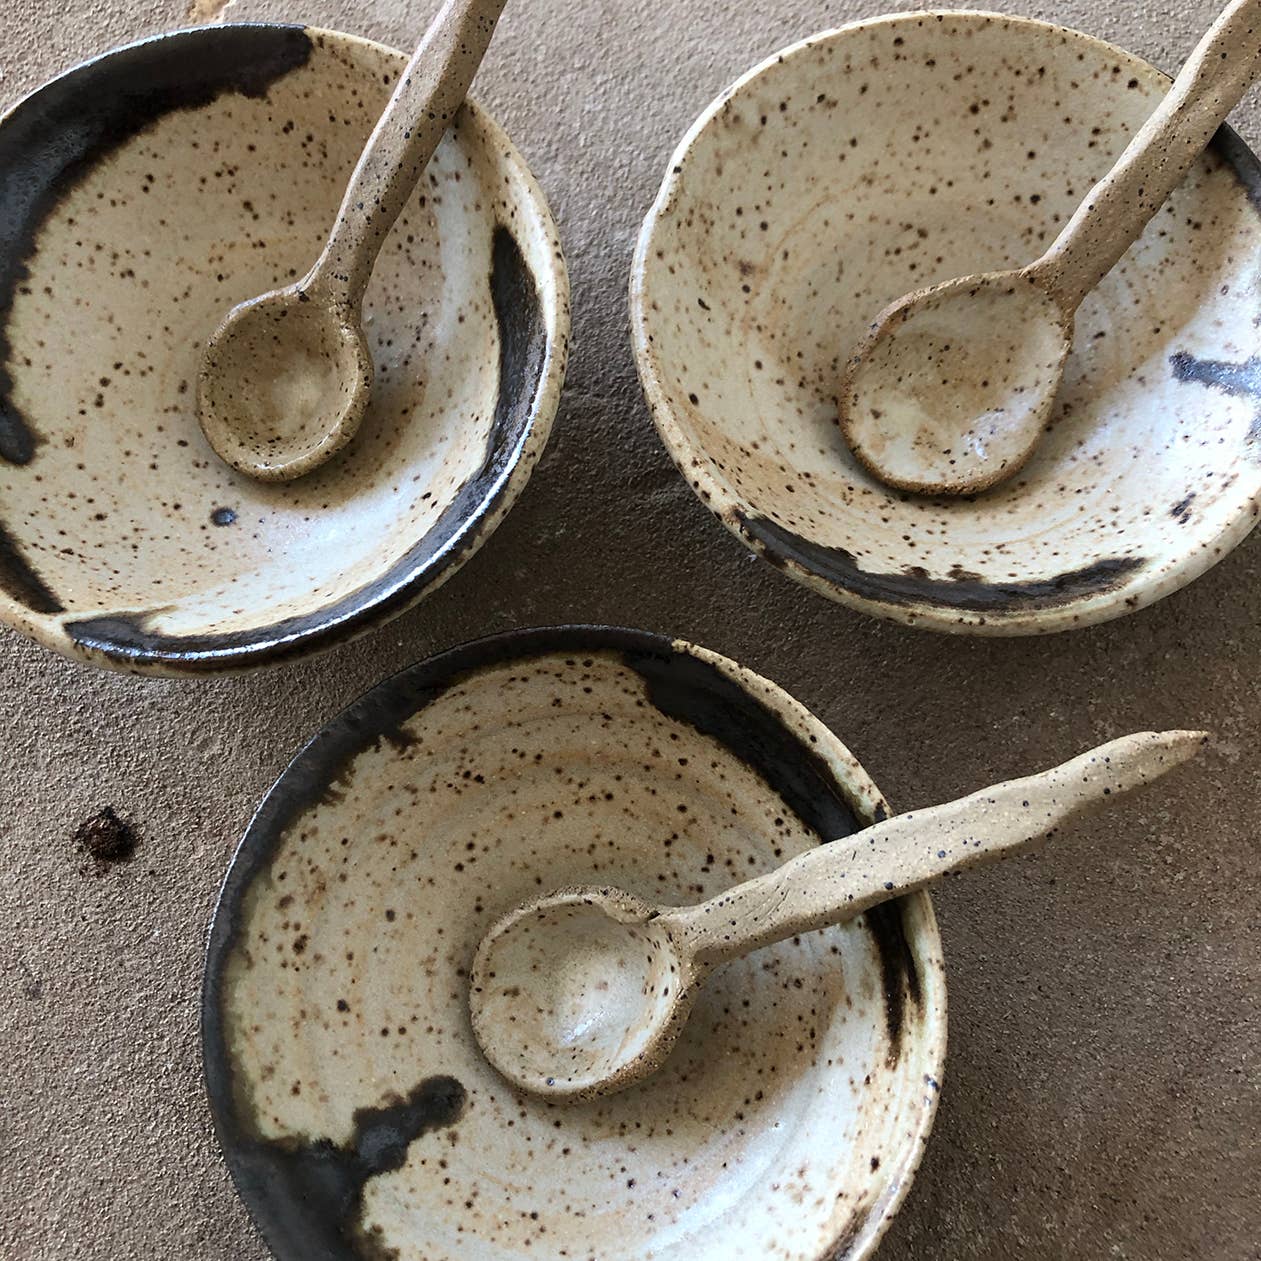 Handmade ceramic bowl & spoon set. Perfect for spices or small sauce servings. Crafted in Lakewood, OH by Gina DeSantis.